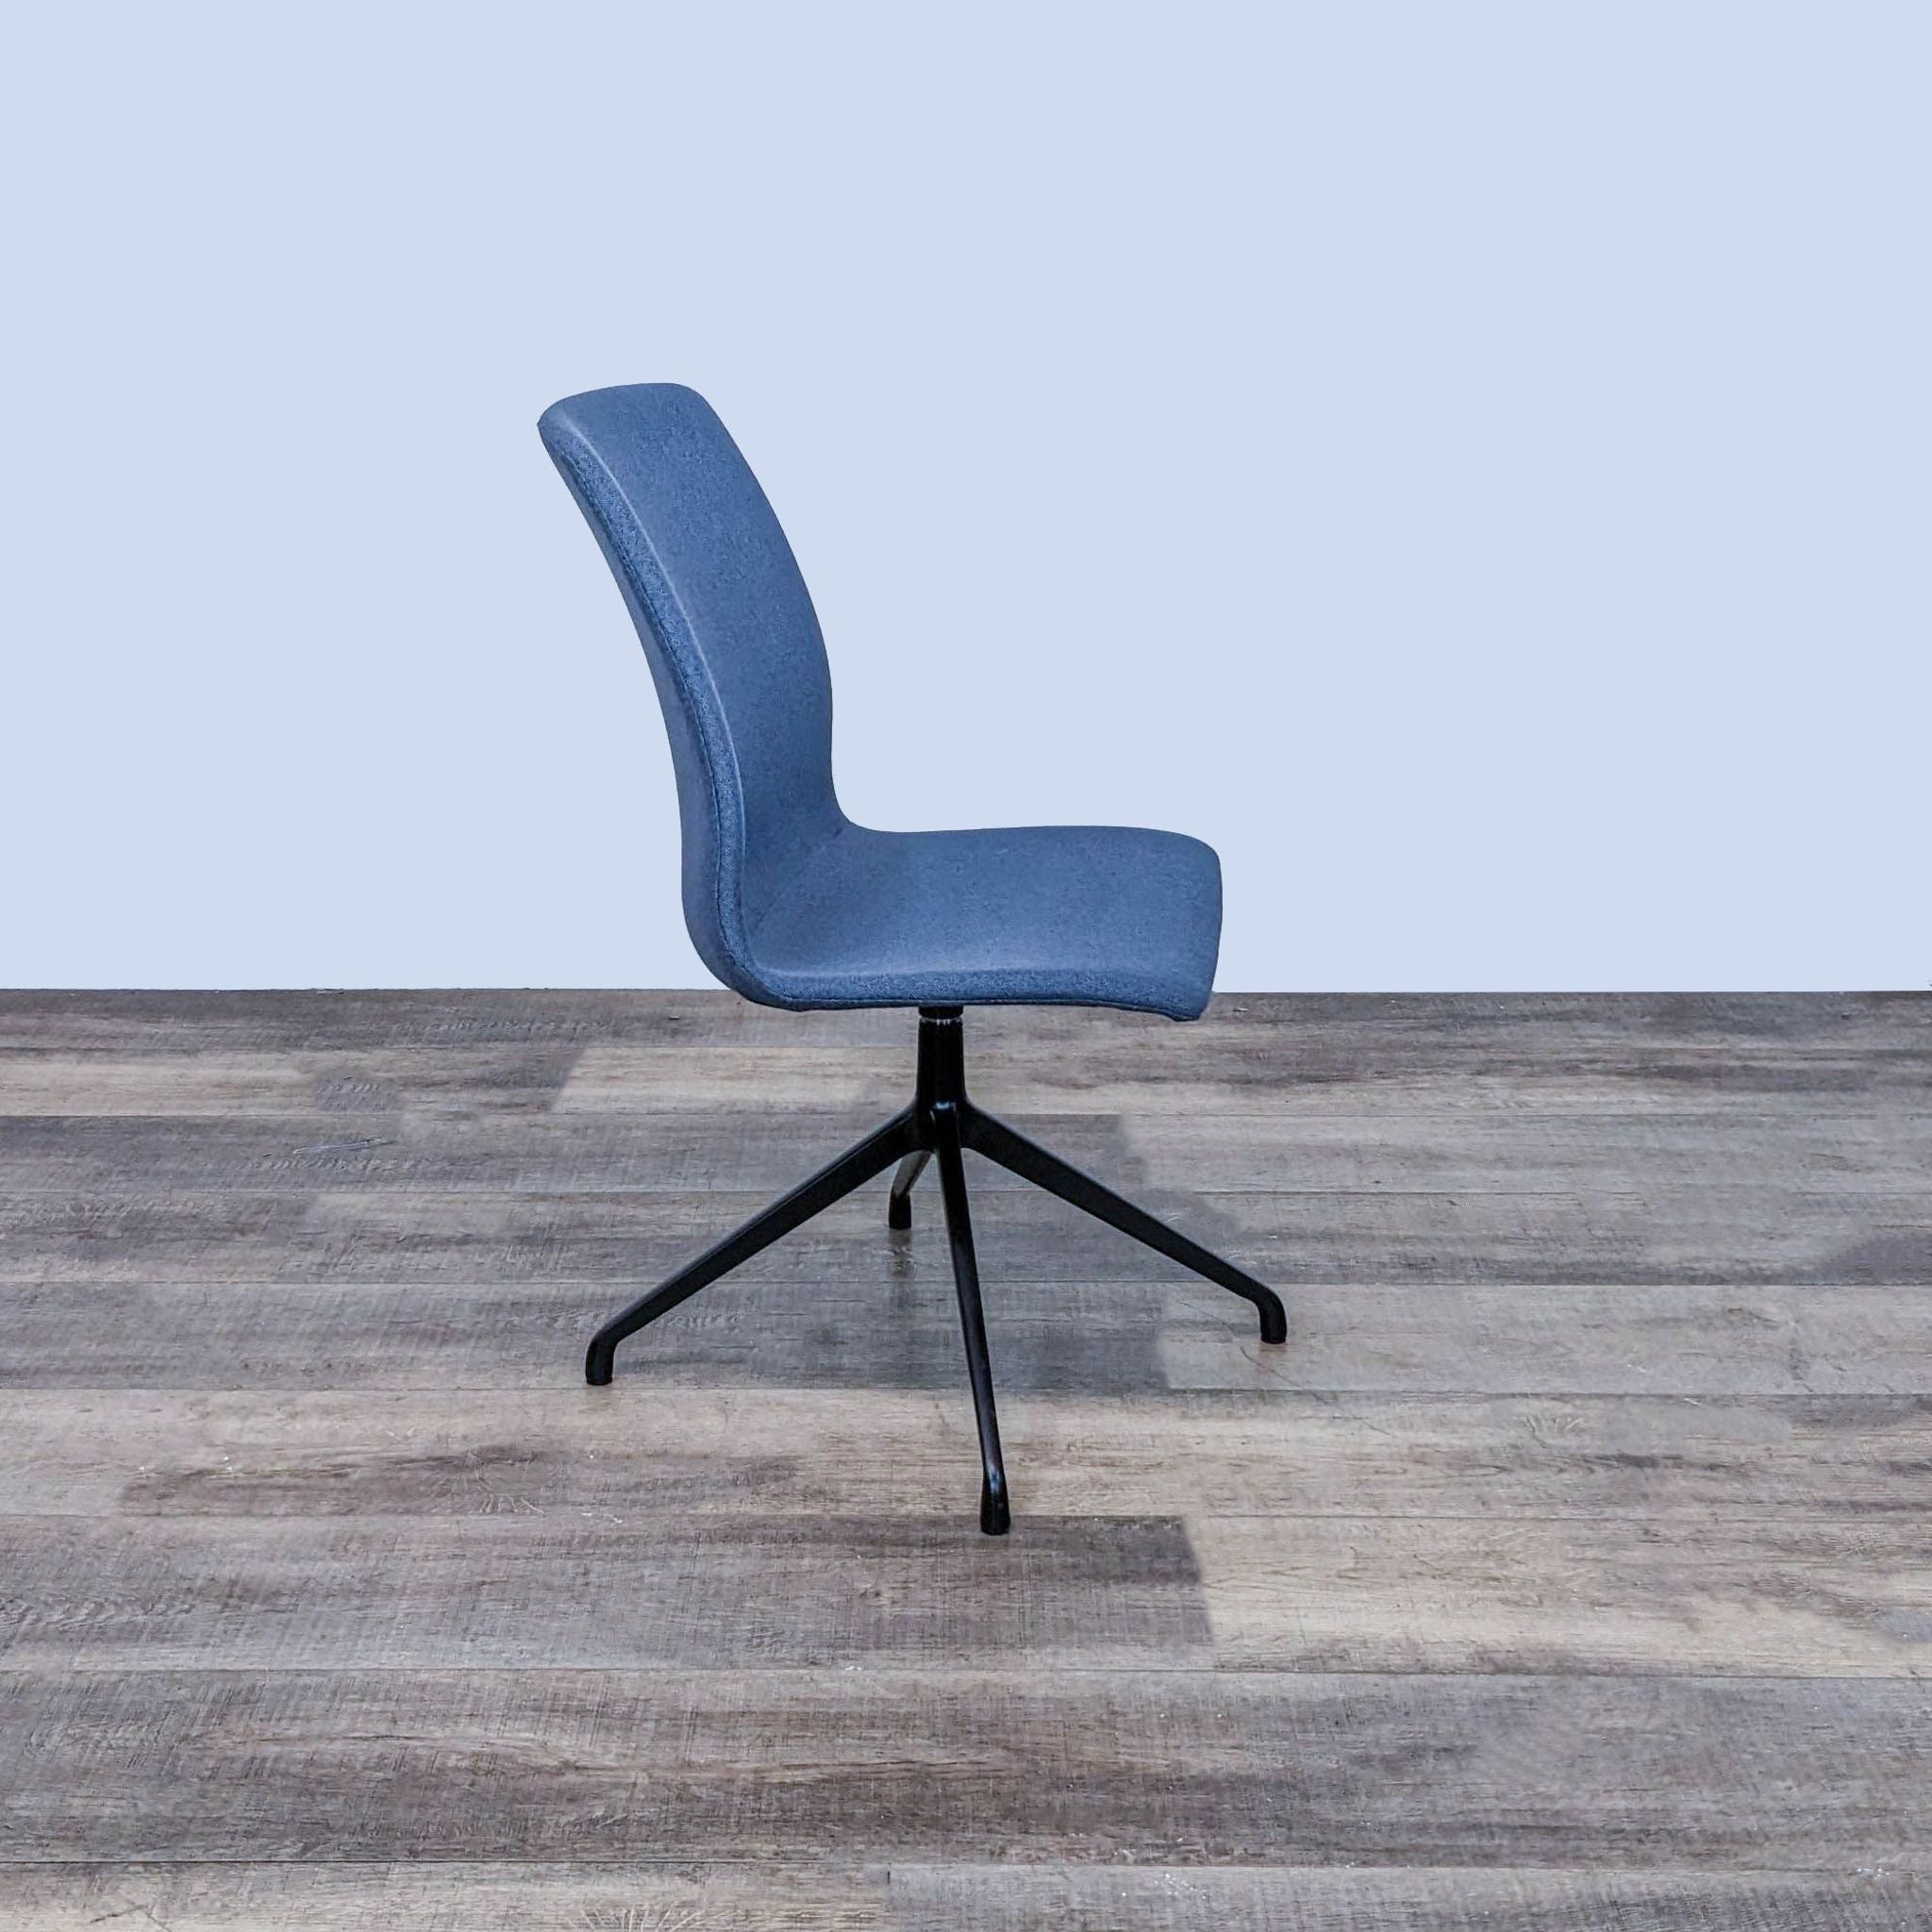 Alt text 2: Ergonomic blue fabric OFS Hairpin chair with powder-coated steel base, angled view on wooden floor.